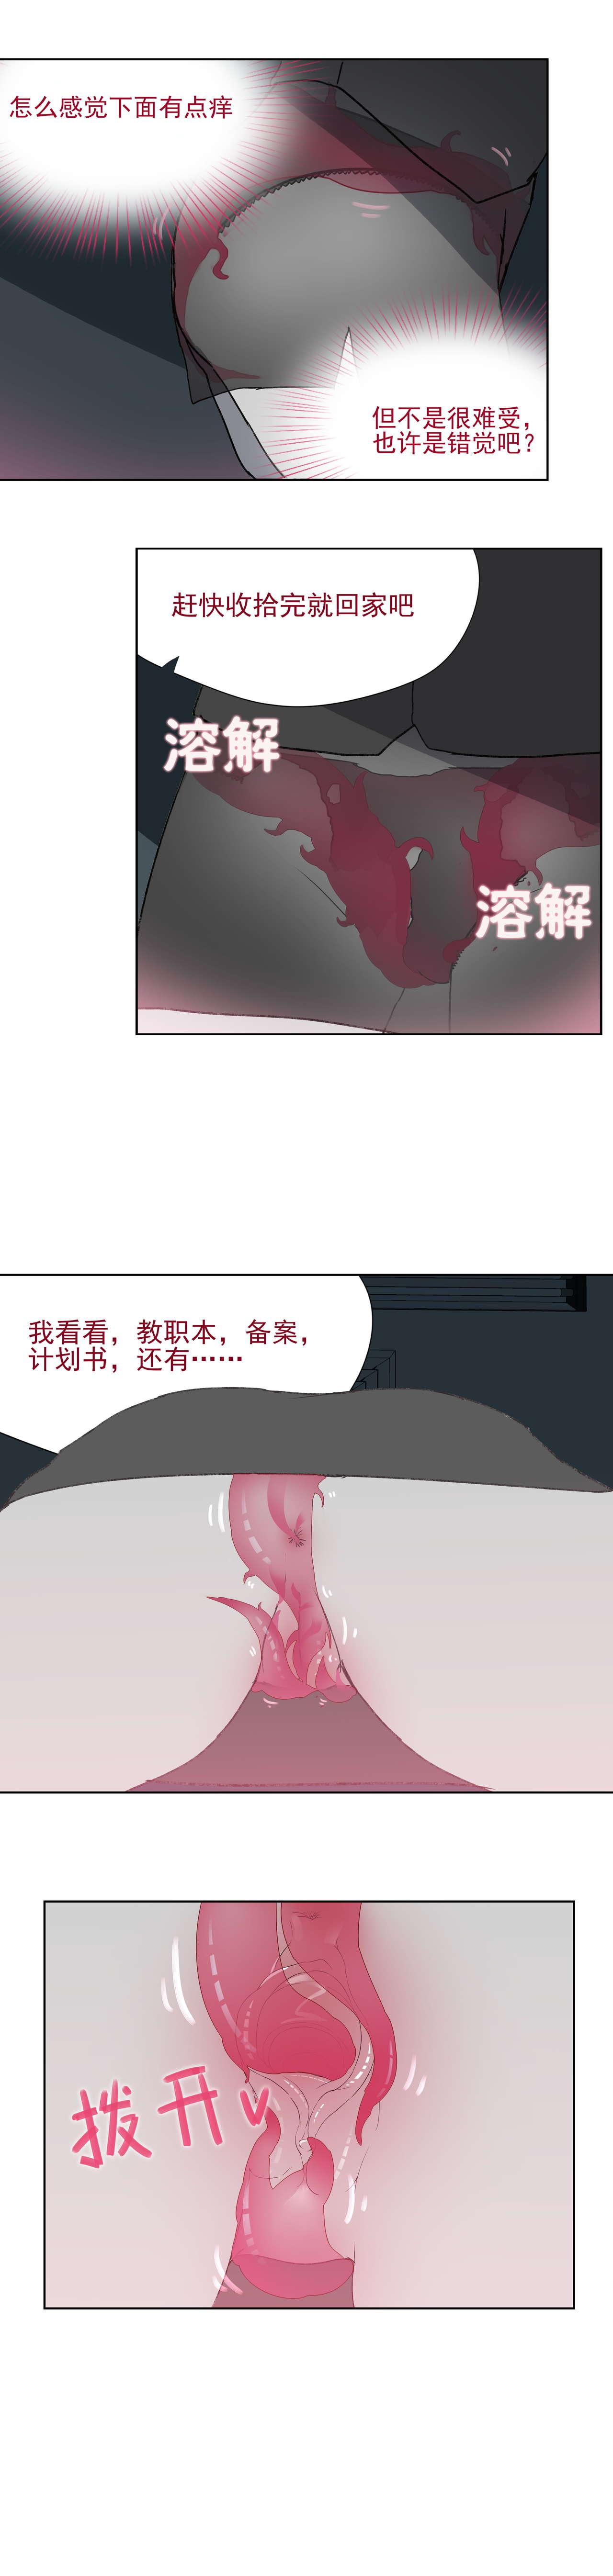 Pissing 寄生之恋 Tentacle love - Original Sapphicerotica - Page 5